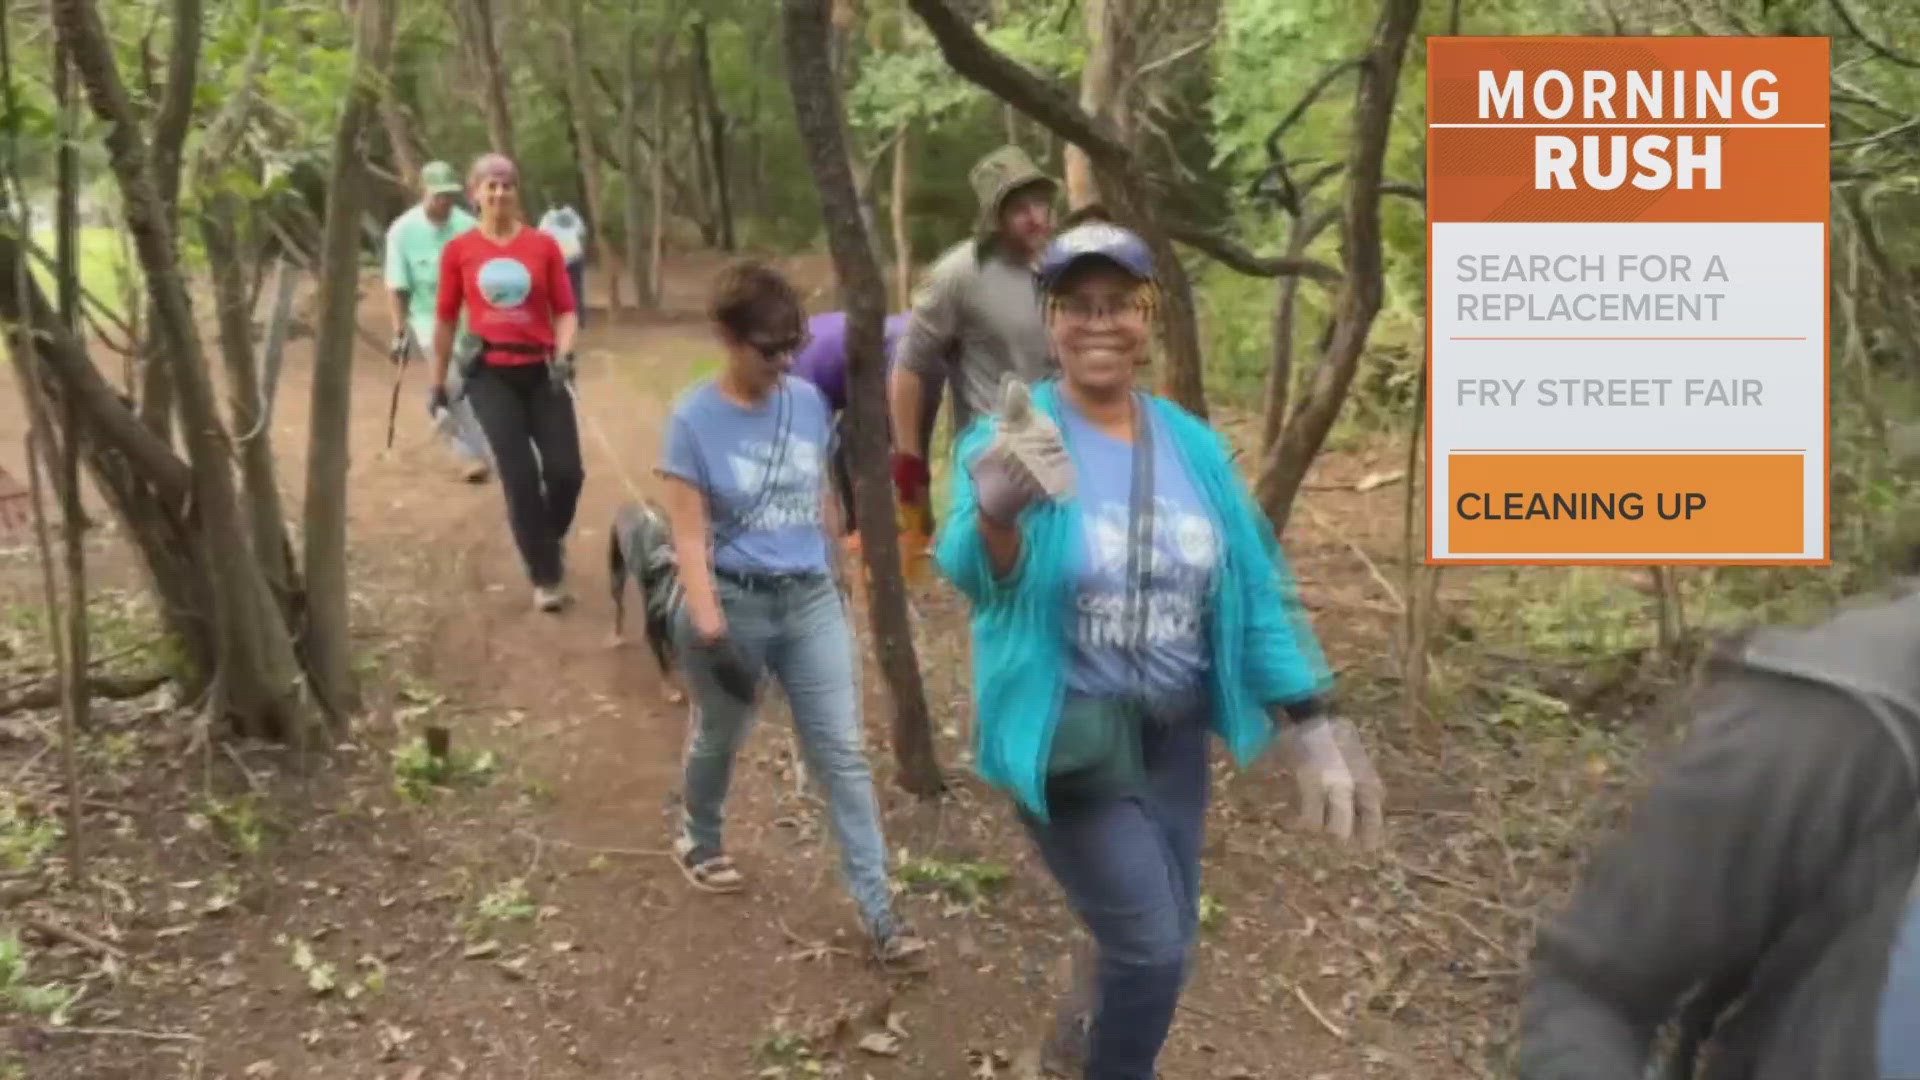 The trail will become the WFAA Nature Trail and span three miles when its open.